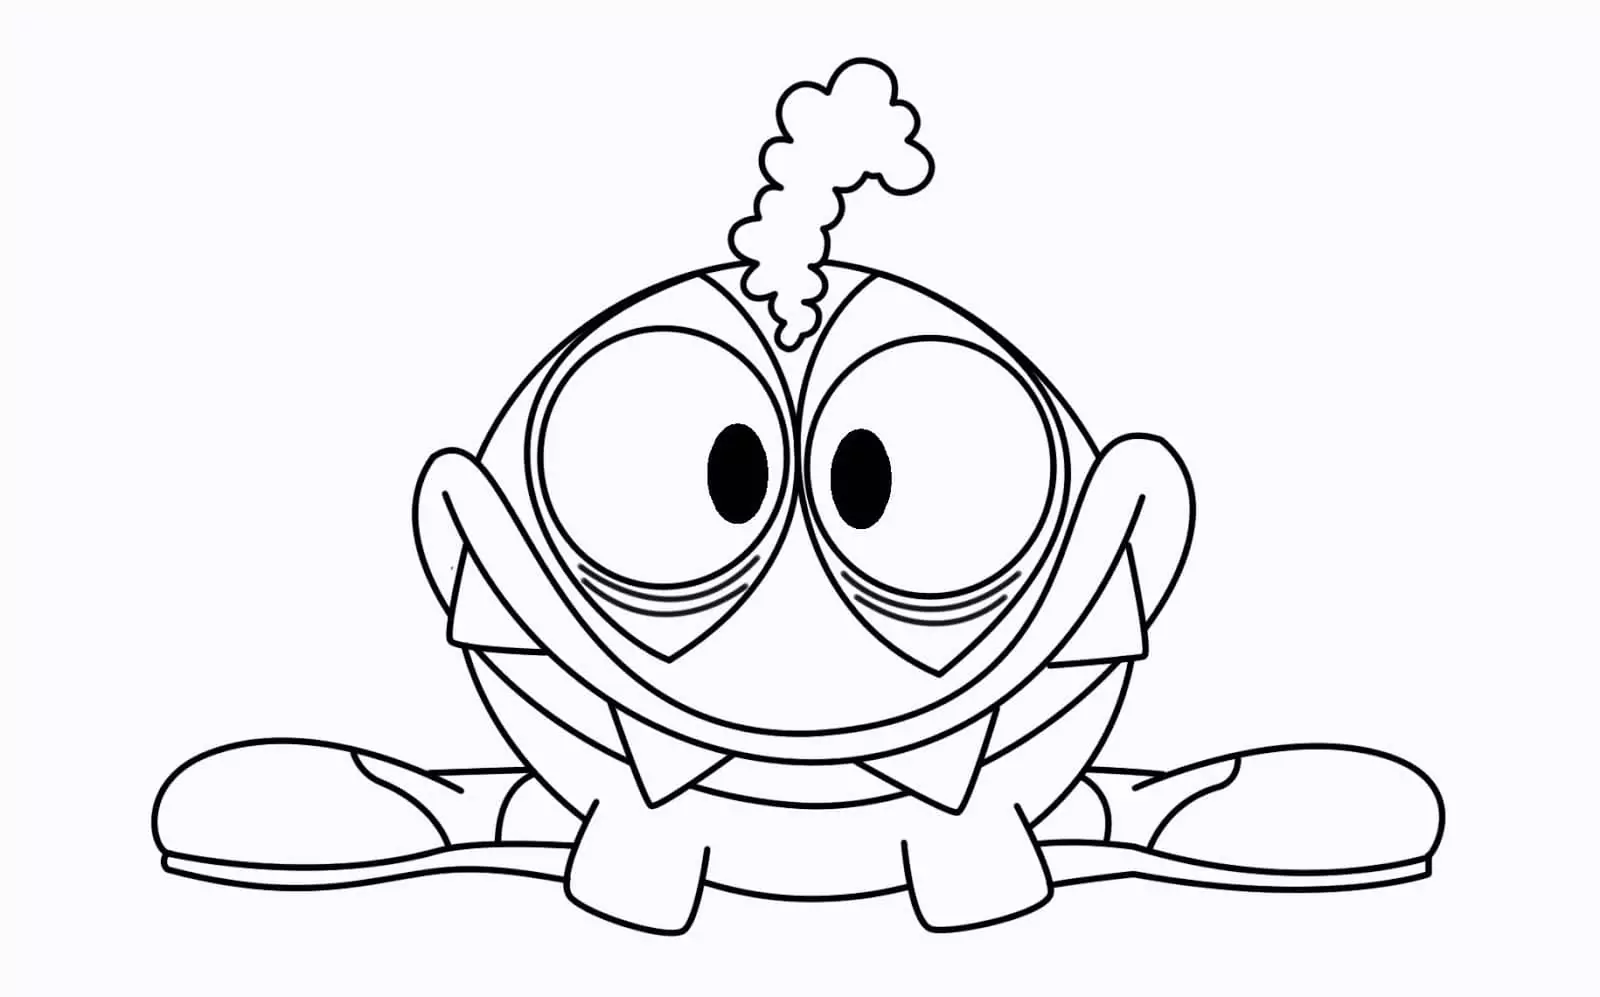 Om Nom 5 Coloring Page - Free Printable Coloring Pages for Kids